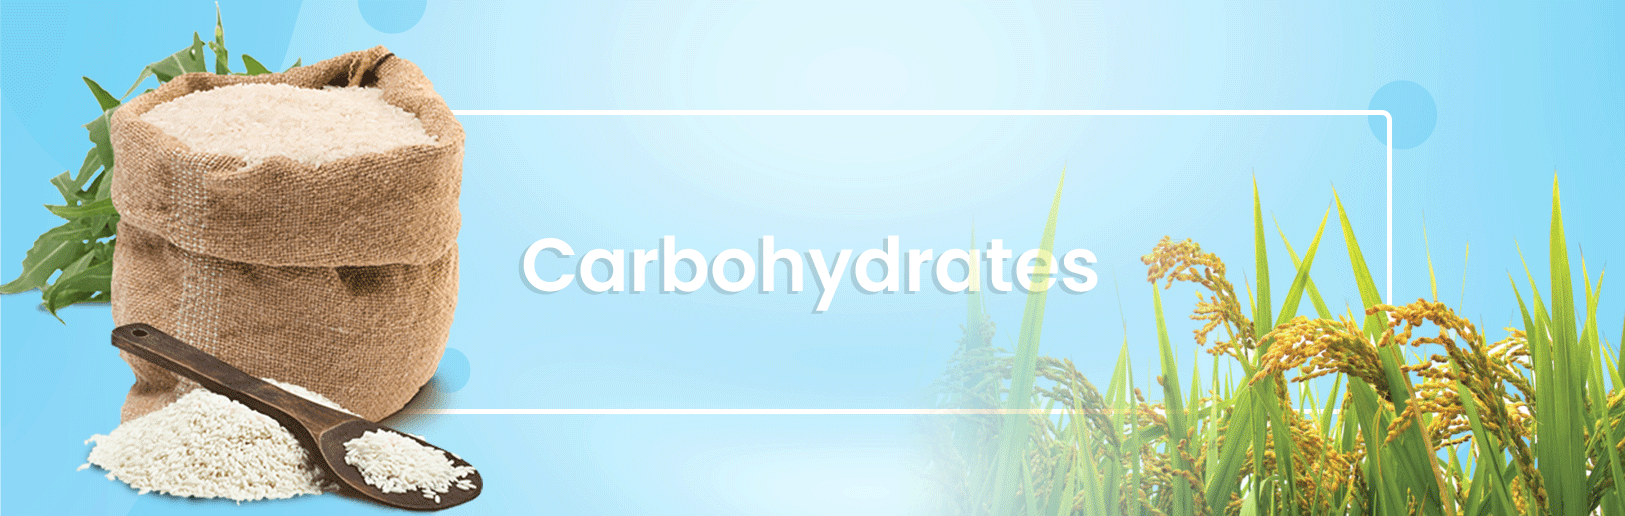 Carbohydrates﻿ for food additive